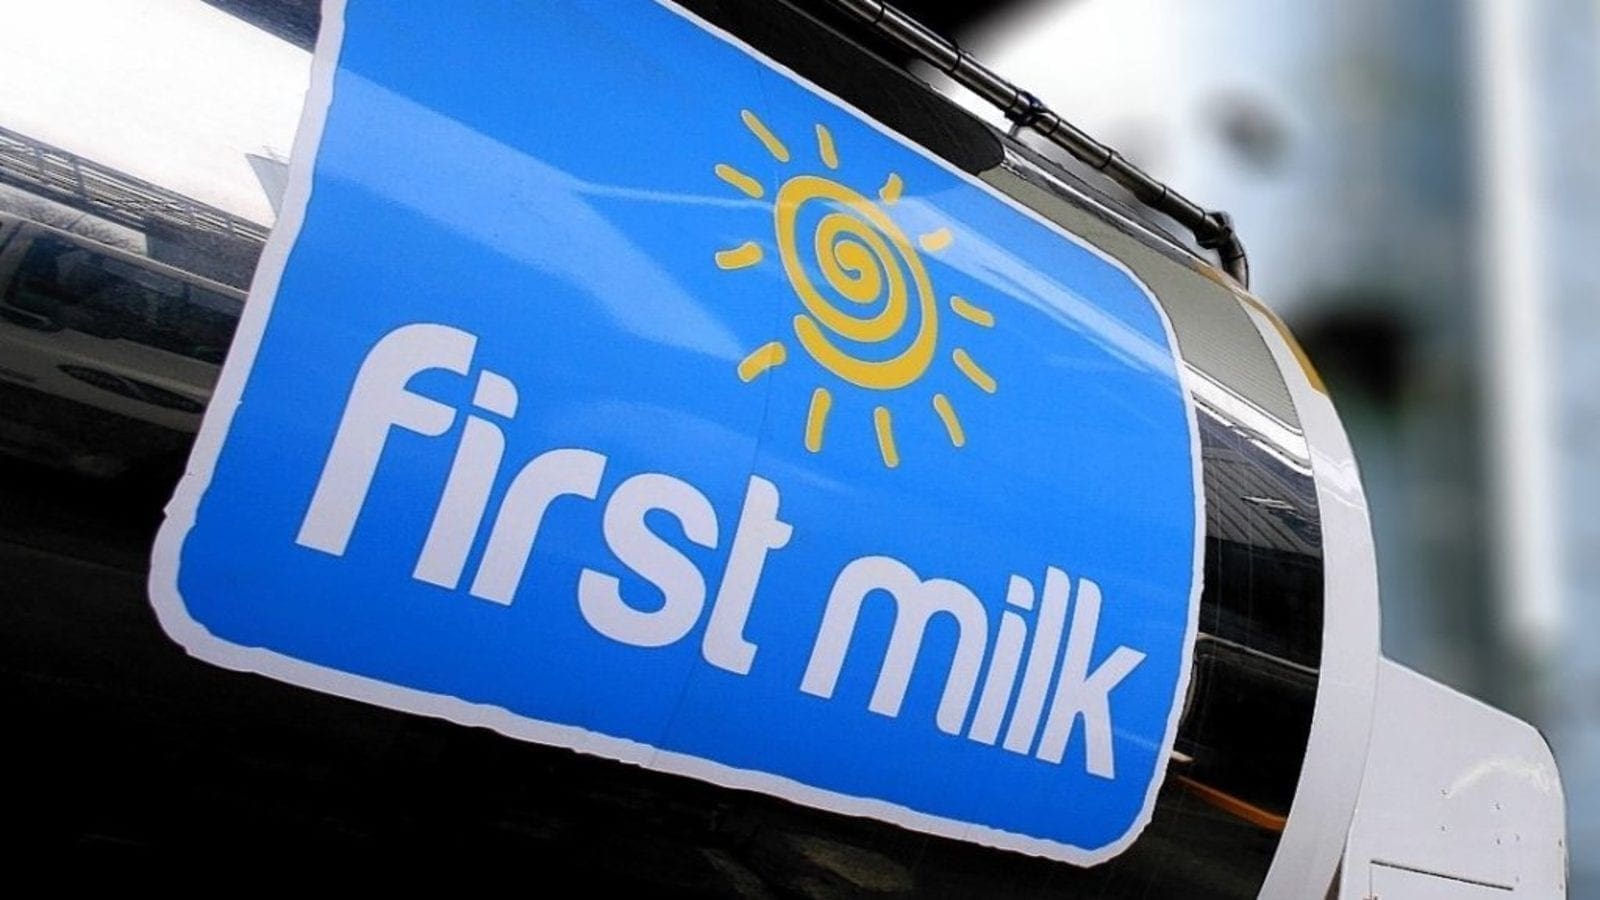 Britain’s First Milk to produce more cheese and whey following US$15m capacity expansion